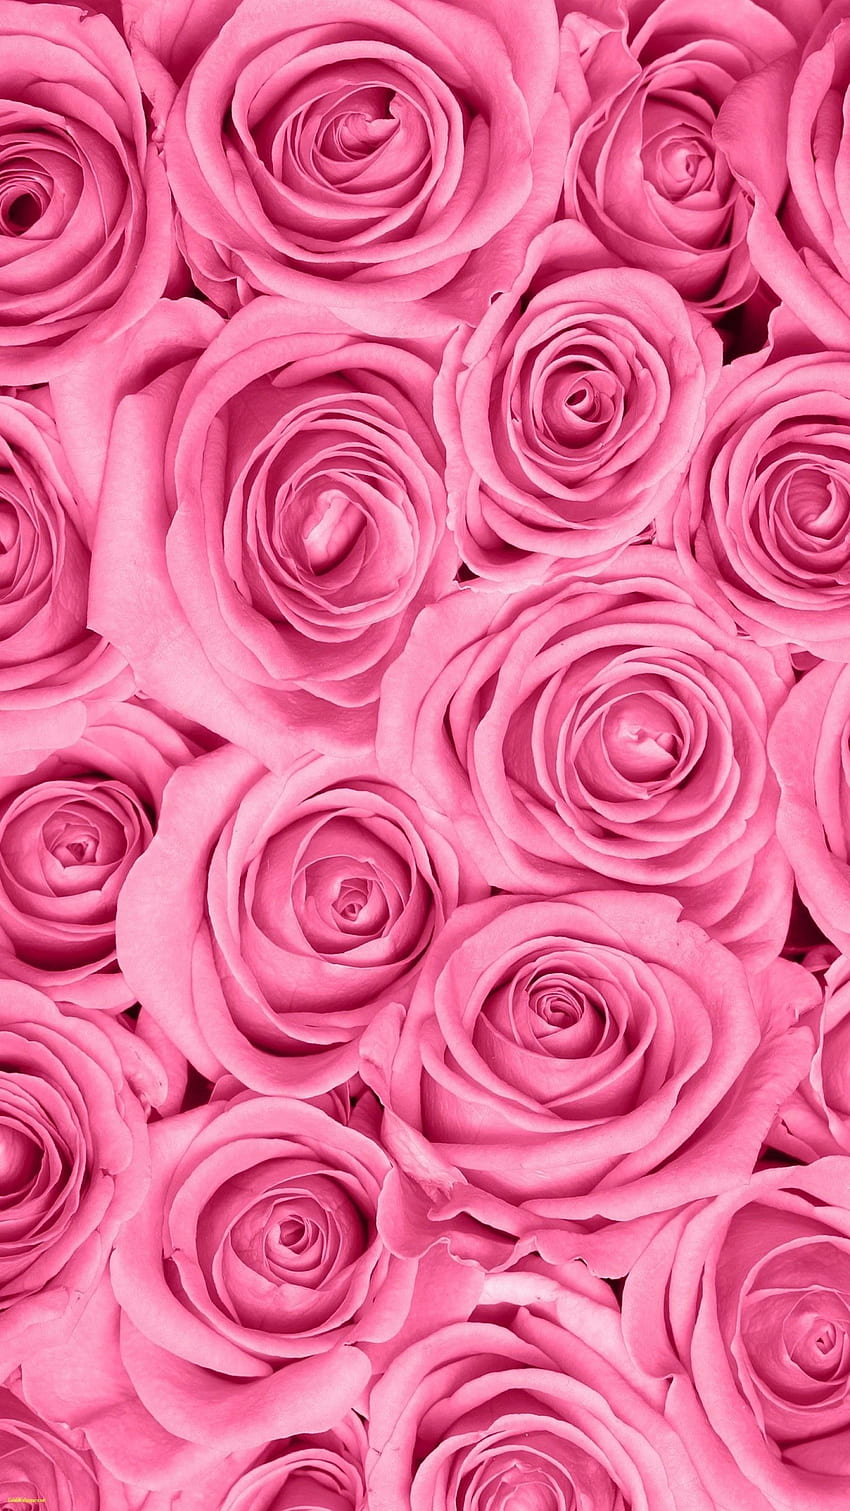 Valentines Day Wallpaper Pink Rose  The Dreamiest iPhone Wallpapers For  Valentines Day That Fit Any Aesthetic  POPSUGAR Tech Photo 7